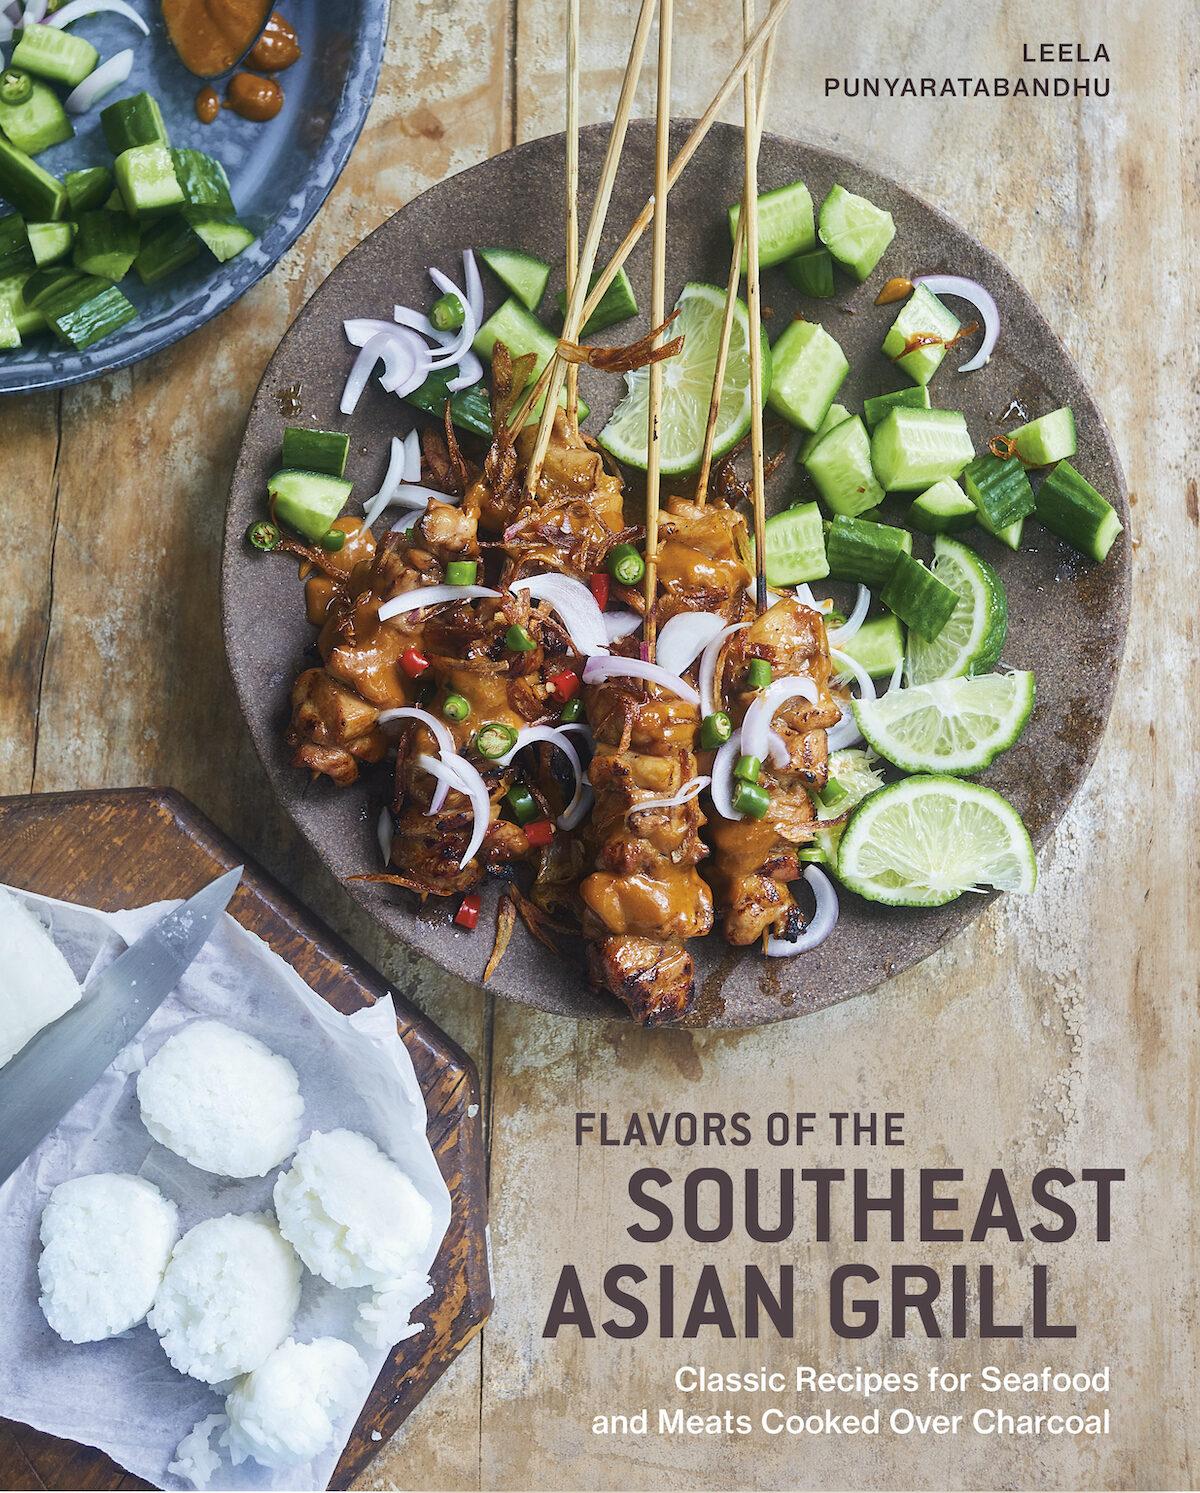 'Flavors of the Southeast Asian Grill: Classic Recipes for Seafood and Meats Cooked Over Charcoal' by Leela Punyaratabandhu (Ten Speed Press, $30).